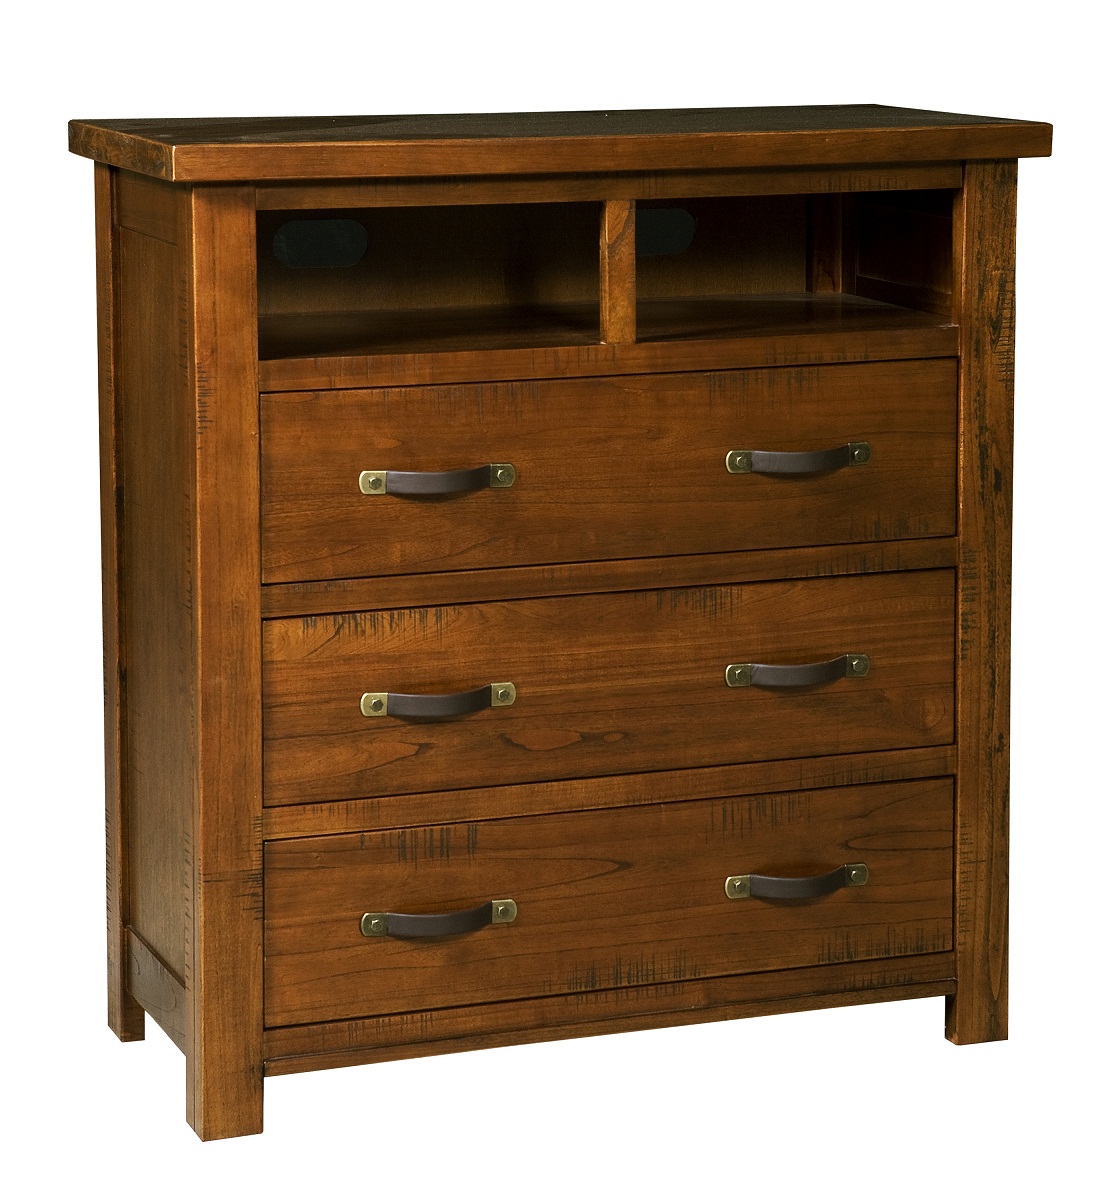 Hillsdale Outback TV Chest - Distressed Chestnut